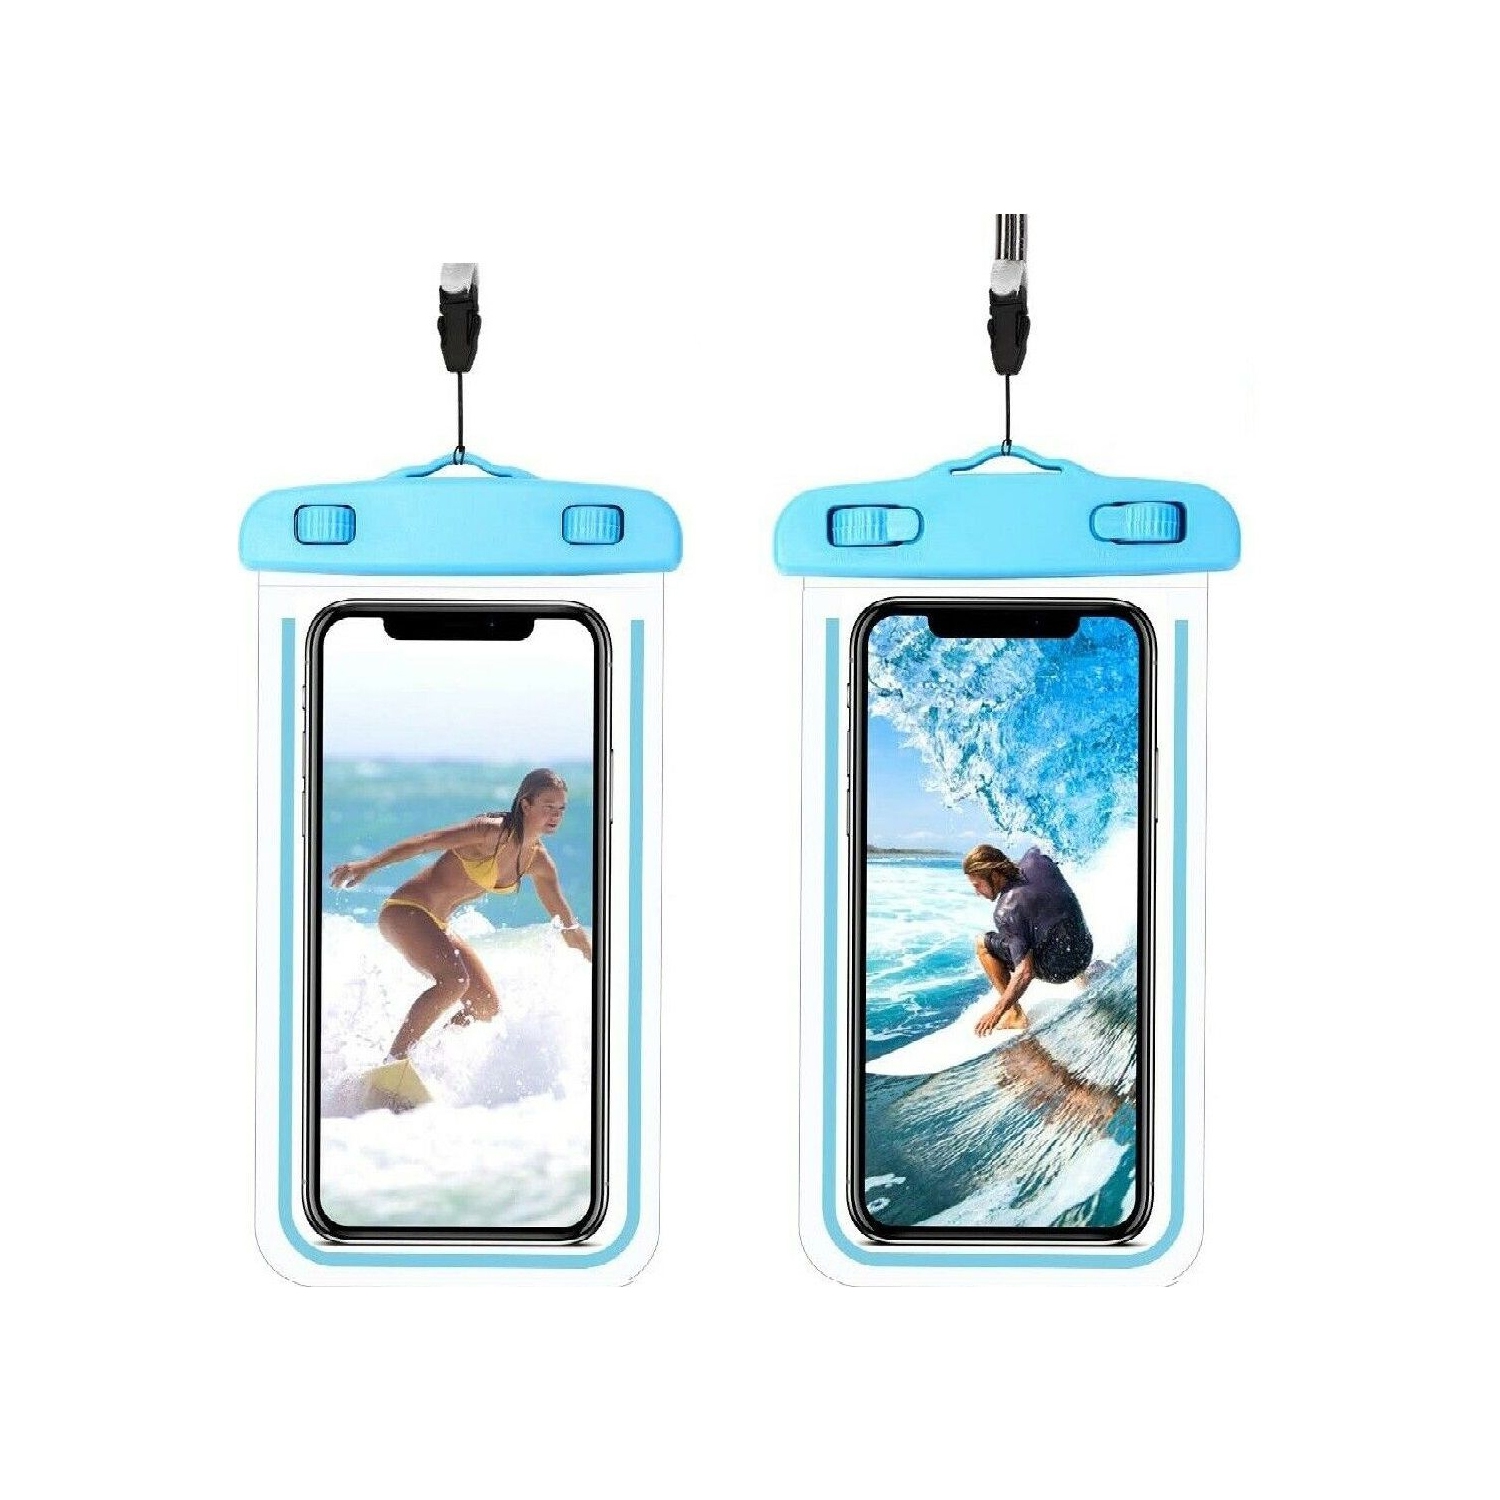 Universal Waterproof Underwater Cell Phone Pouch Case Swimming Bag Fits Most Mobile Phones